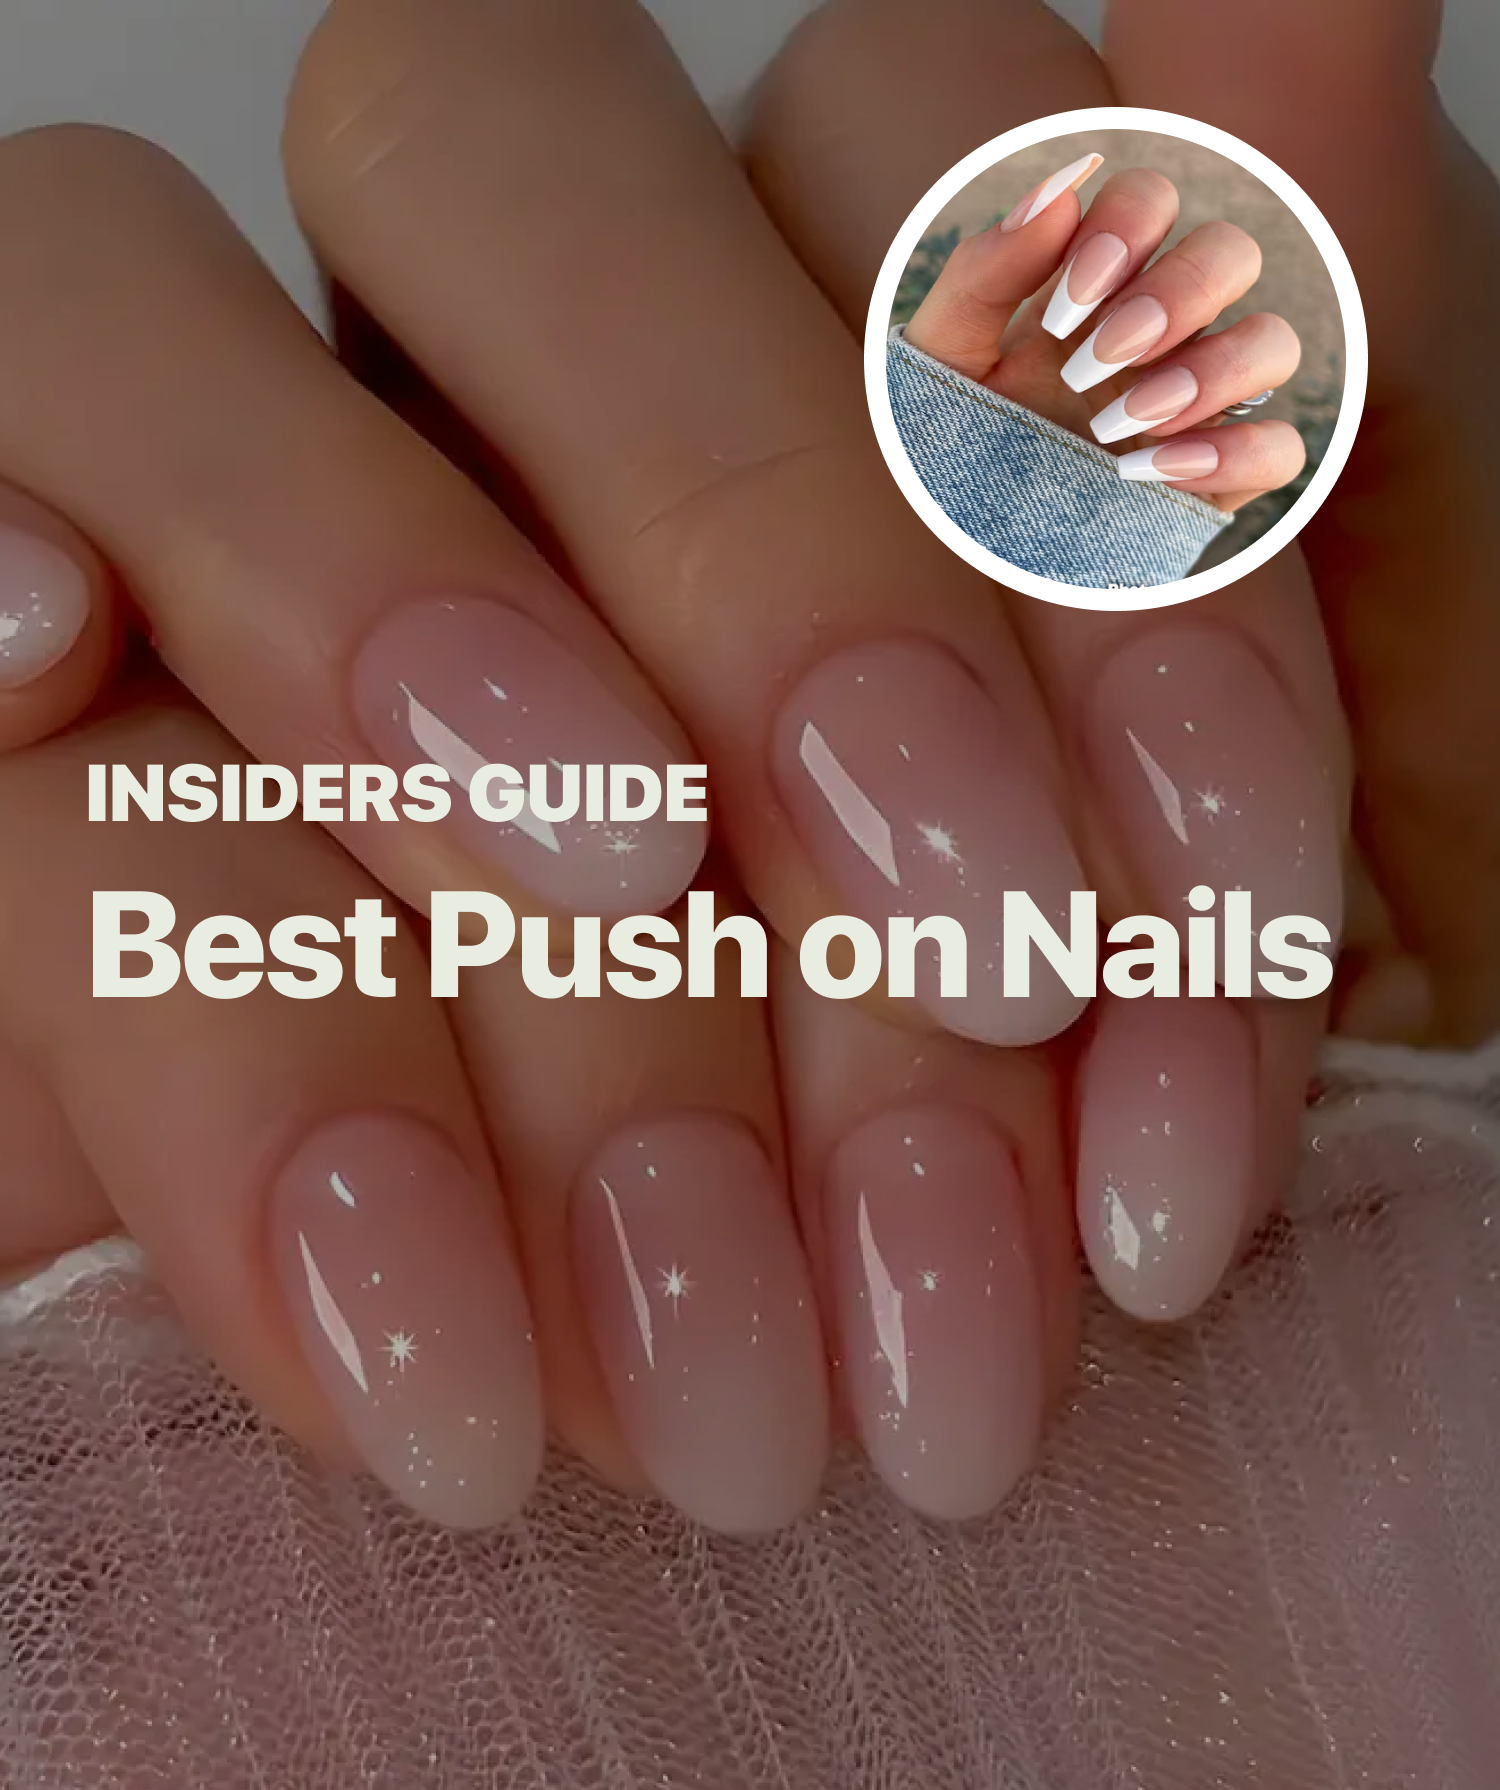 Best Press On Nails: How To Guide & Expert Top Picks